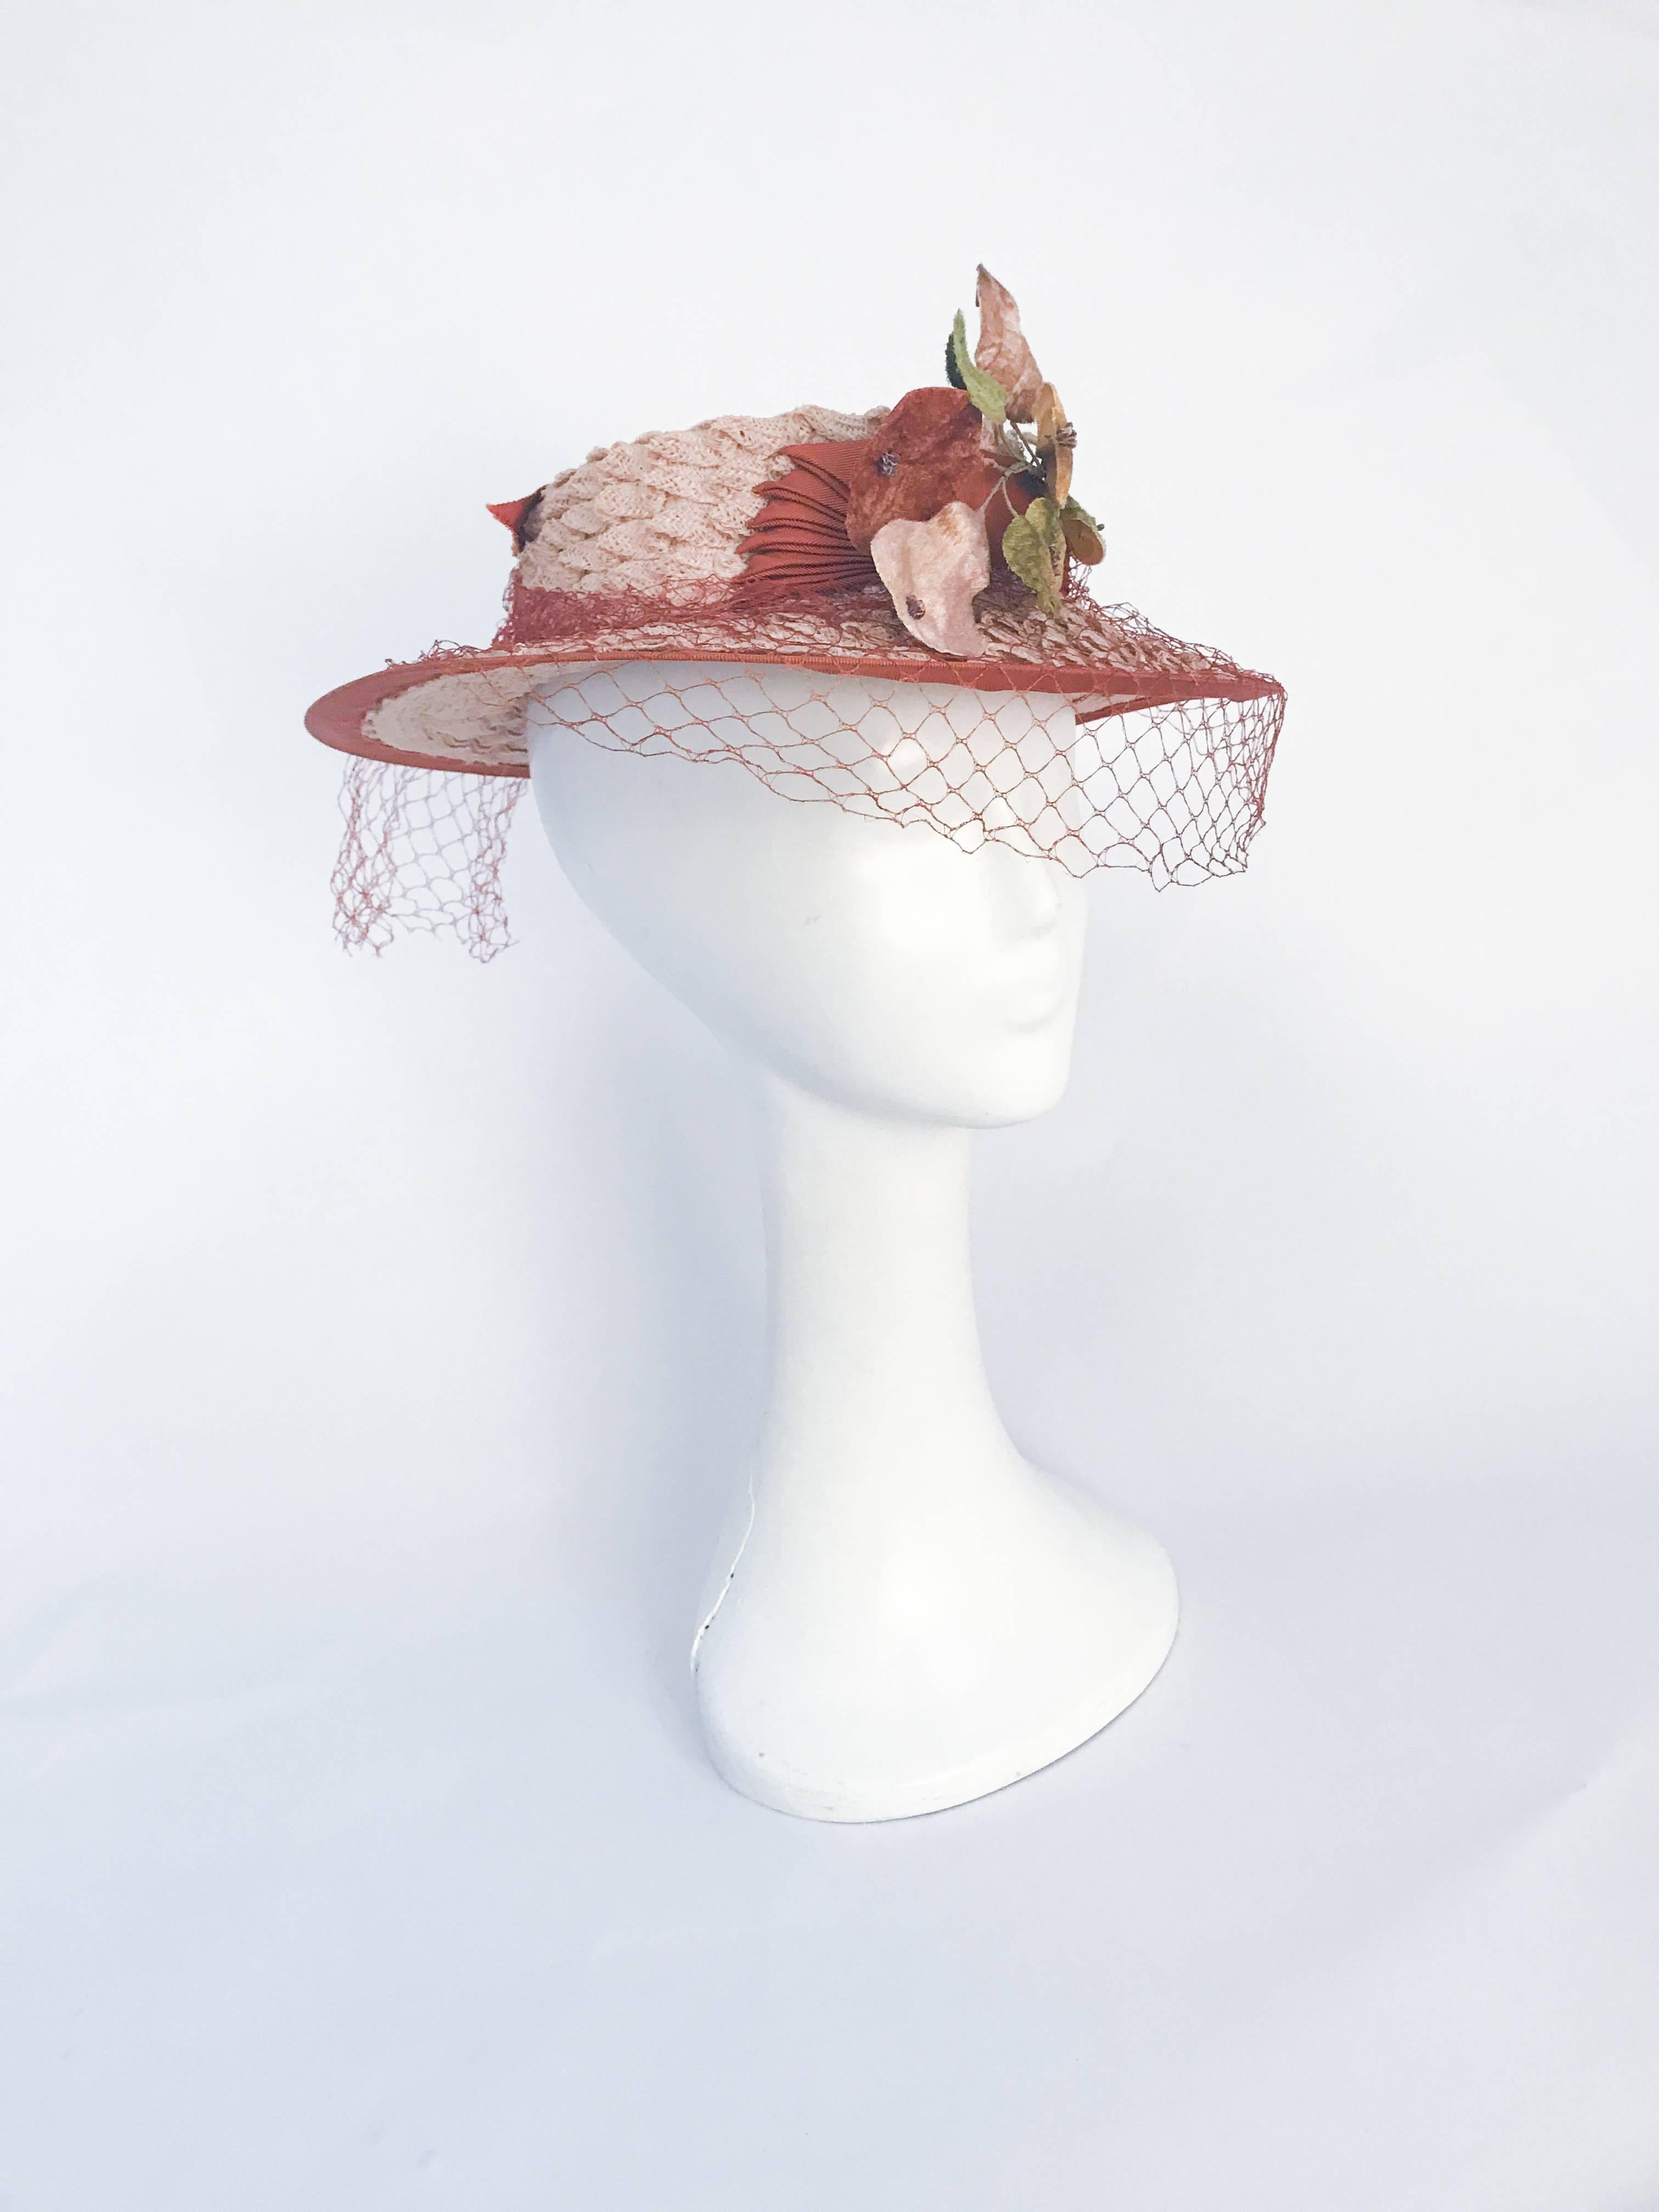 1940s Woven Coated Straw hat with Rust Trim and Velvet Fruit. Woven straw hat with gros grain trim in light rust color and velvet fruit. Matching veil and gros grain bow on the crown of the hat.